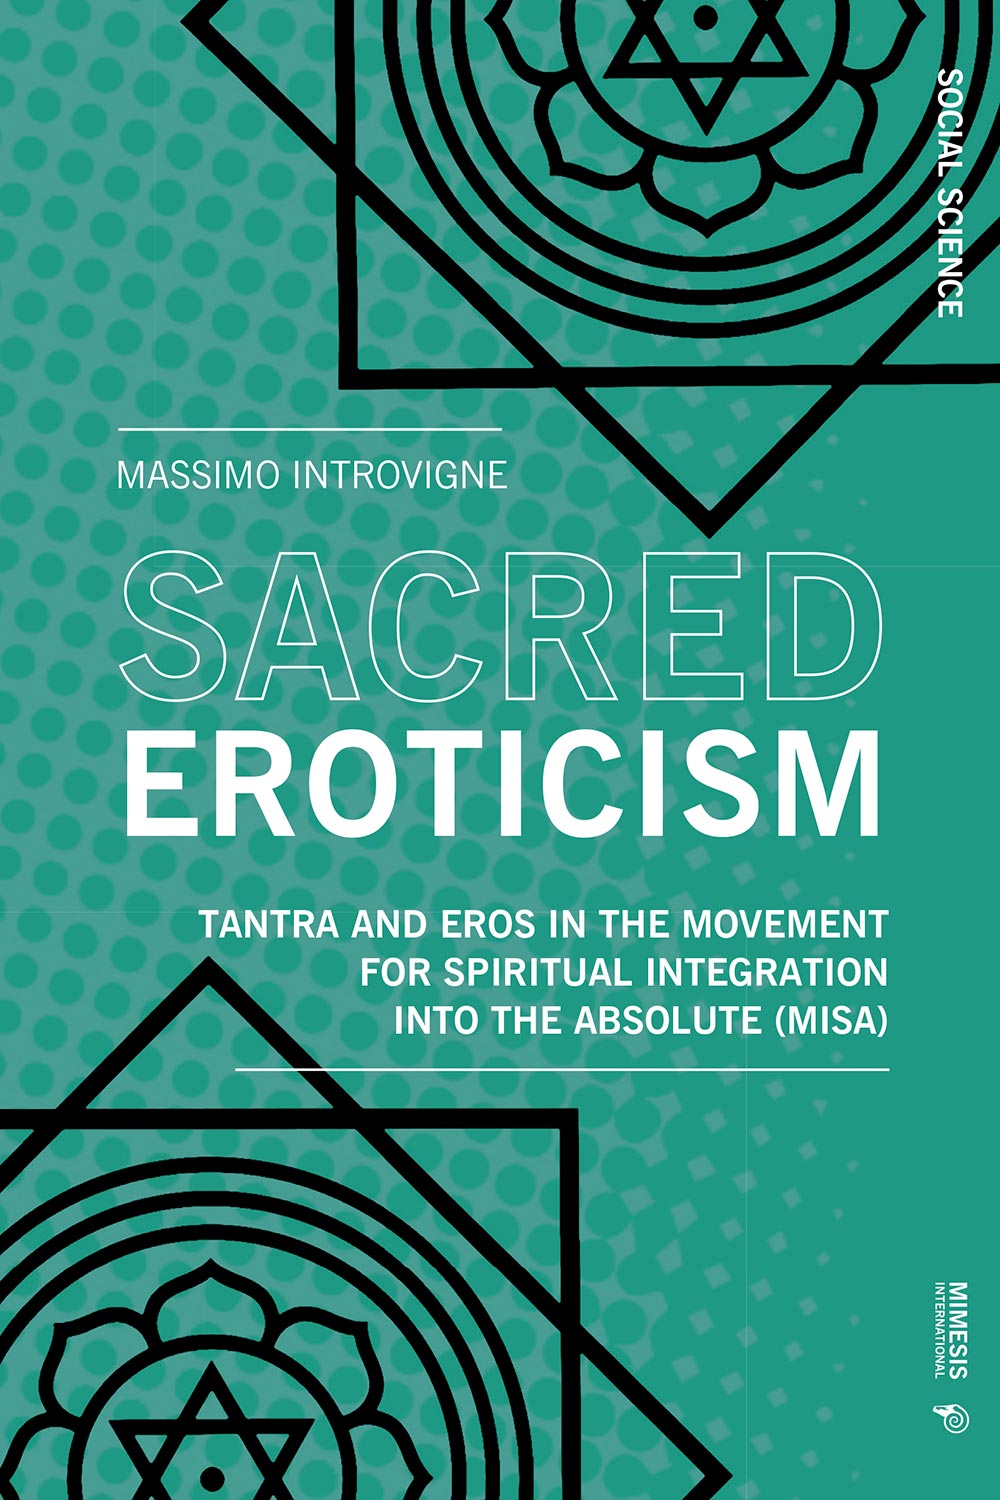 Sacred Eroticism. Tantra and Eros in the Movement for Spiritual Integration into the Absolute (MISA)